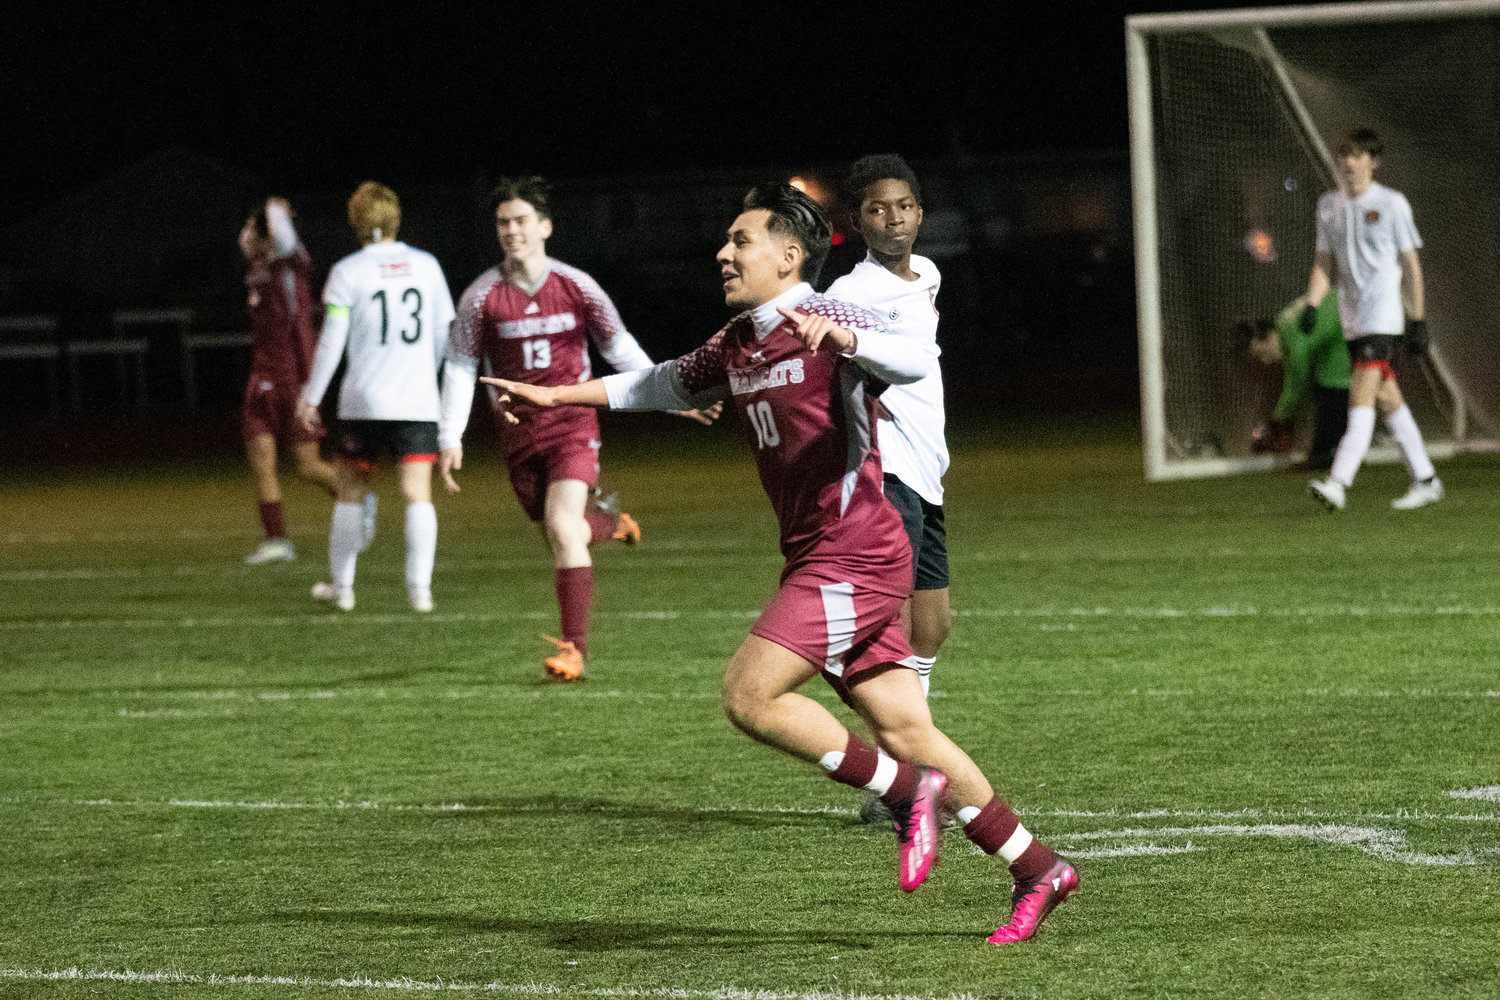 Elvis Leal Perez celebrates his goal in the final minute of W.F. West's matchup against Tenino on March 9, and Centralia's jamboree.